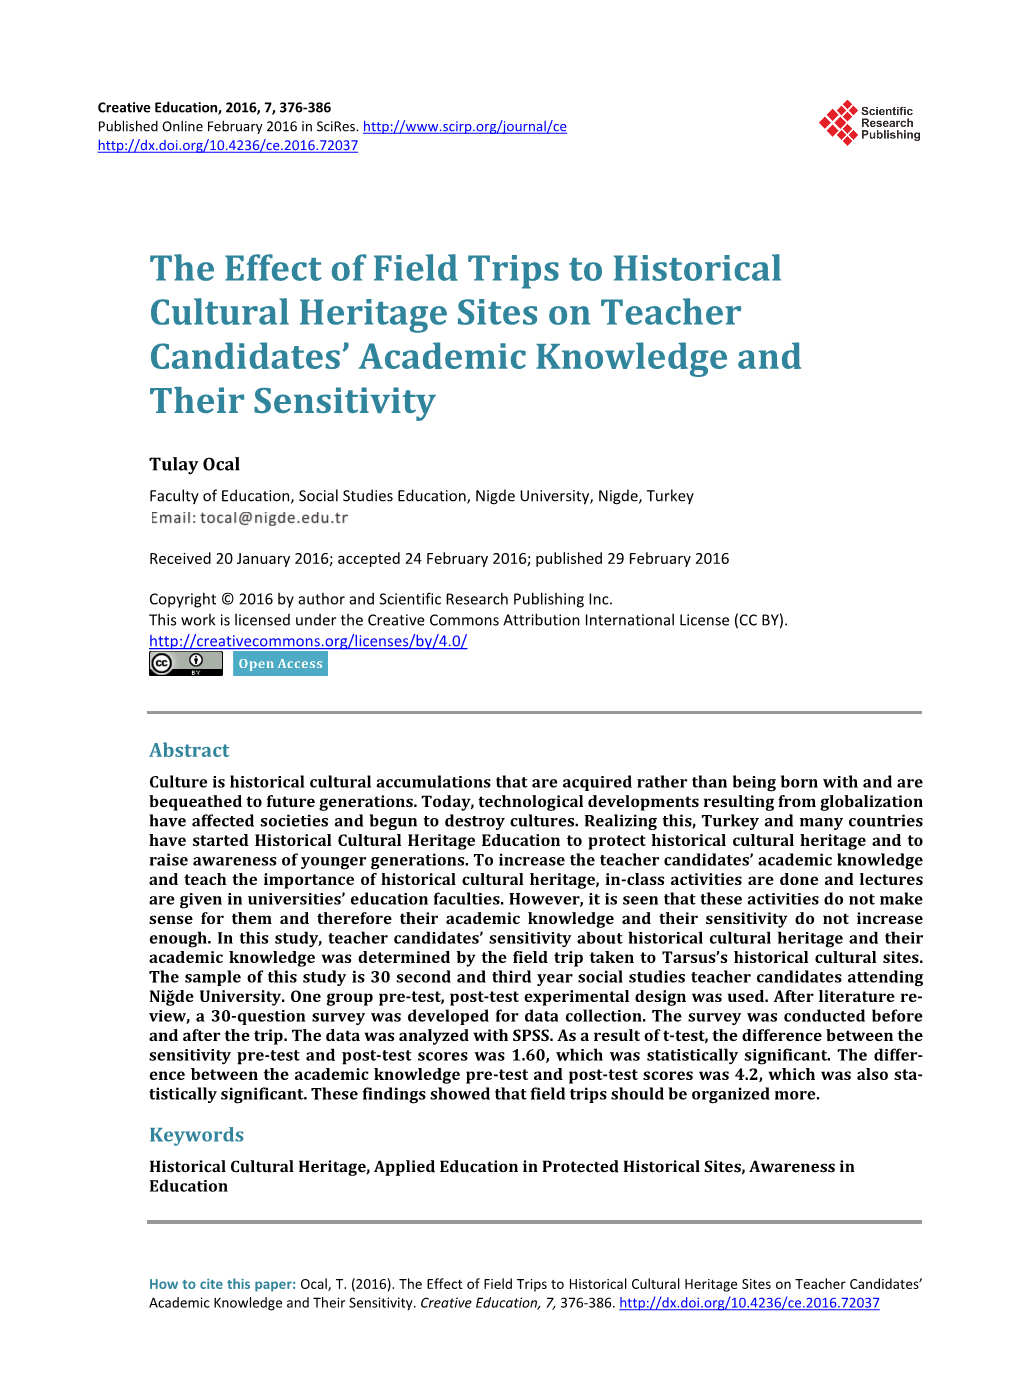 The Effect of Field Trips to Historical Cultural Heritage Sites on Teacher Candidates’ Academic Knowledge and Their Sensitivity